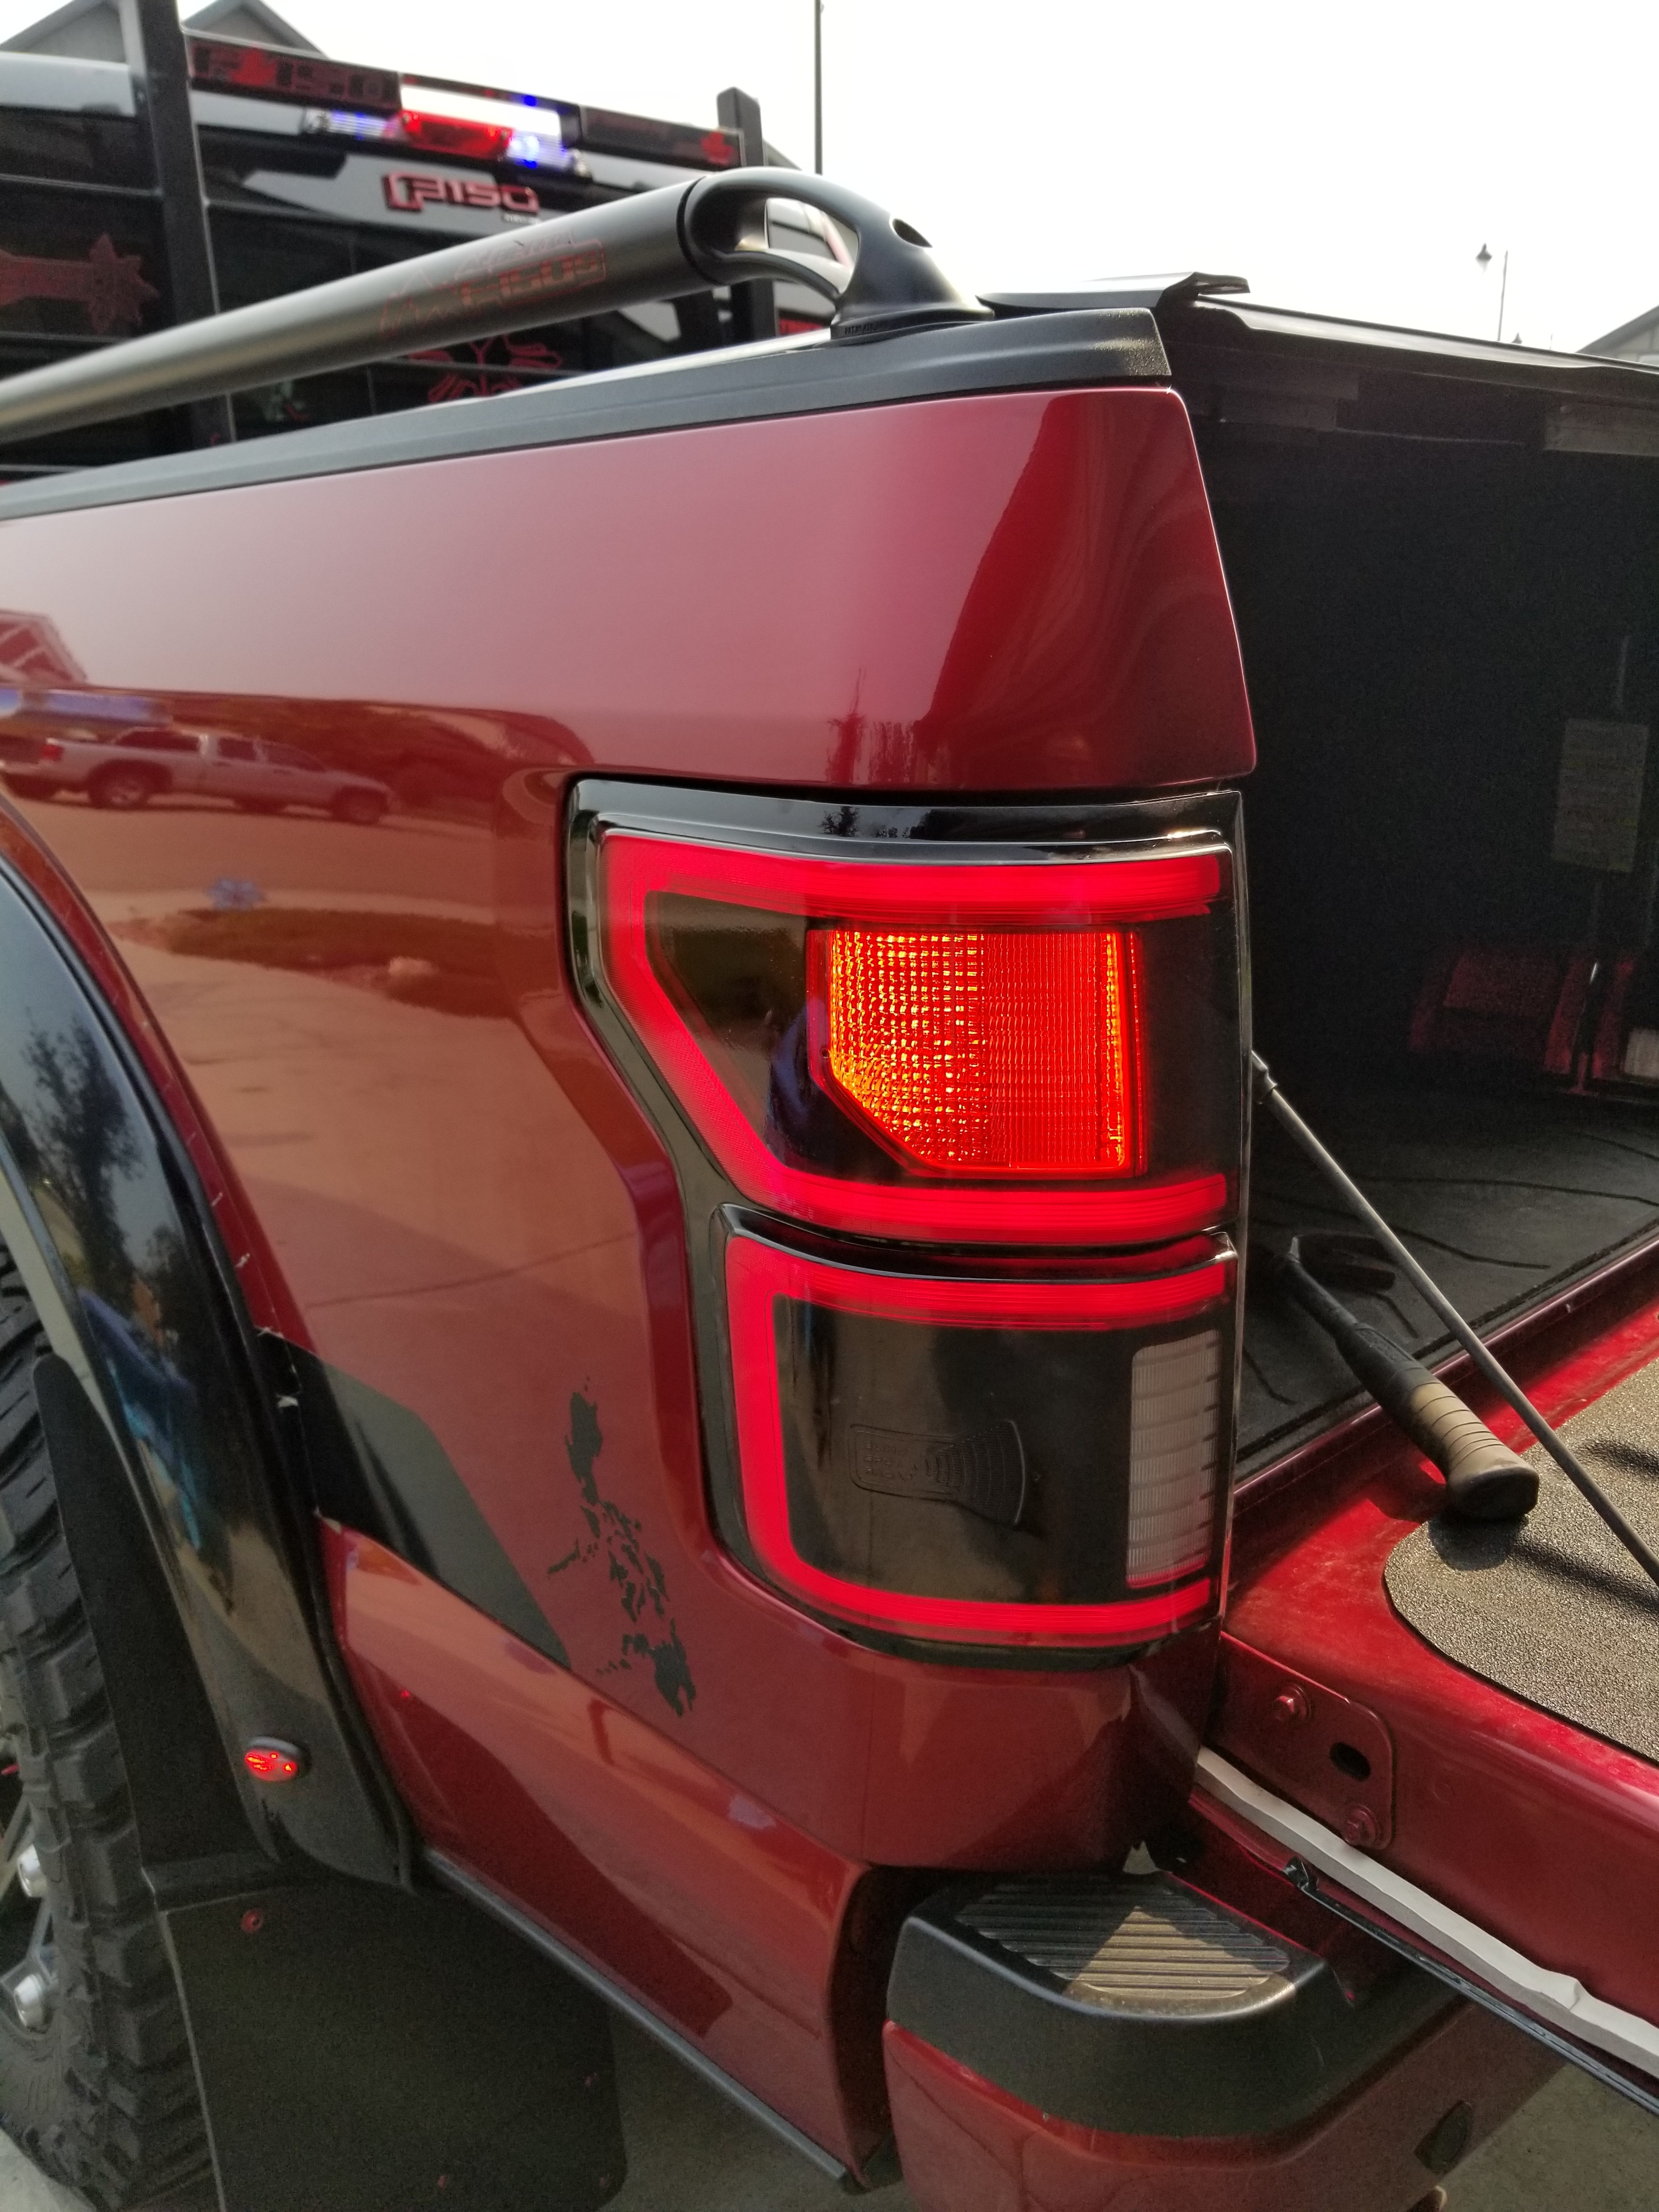 45 Best Of 2018 F150 Tail Light Wiring Diagram